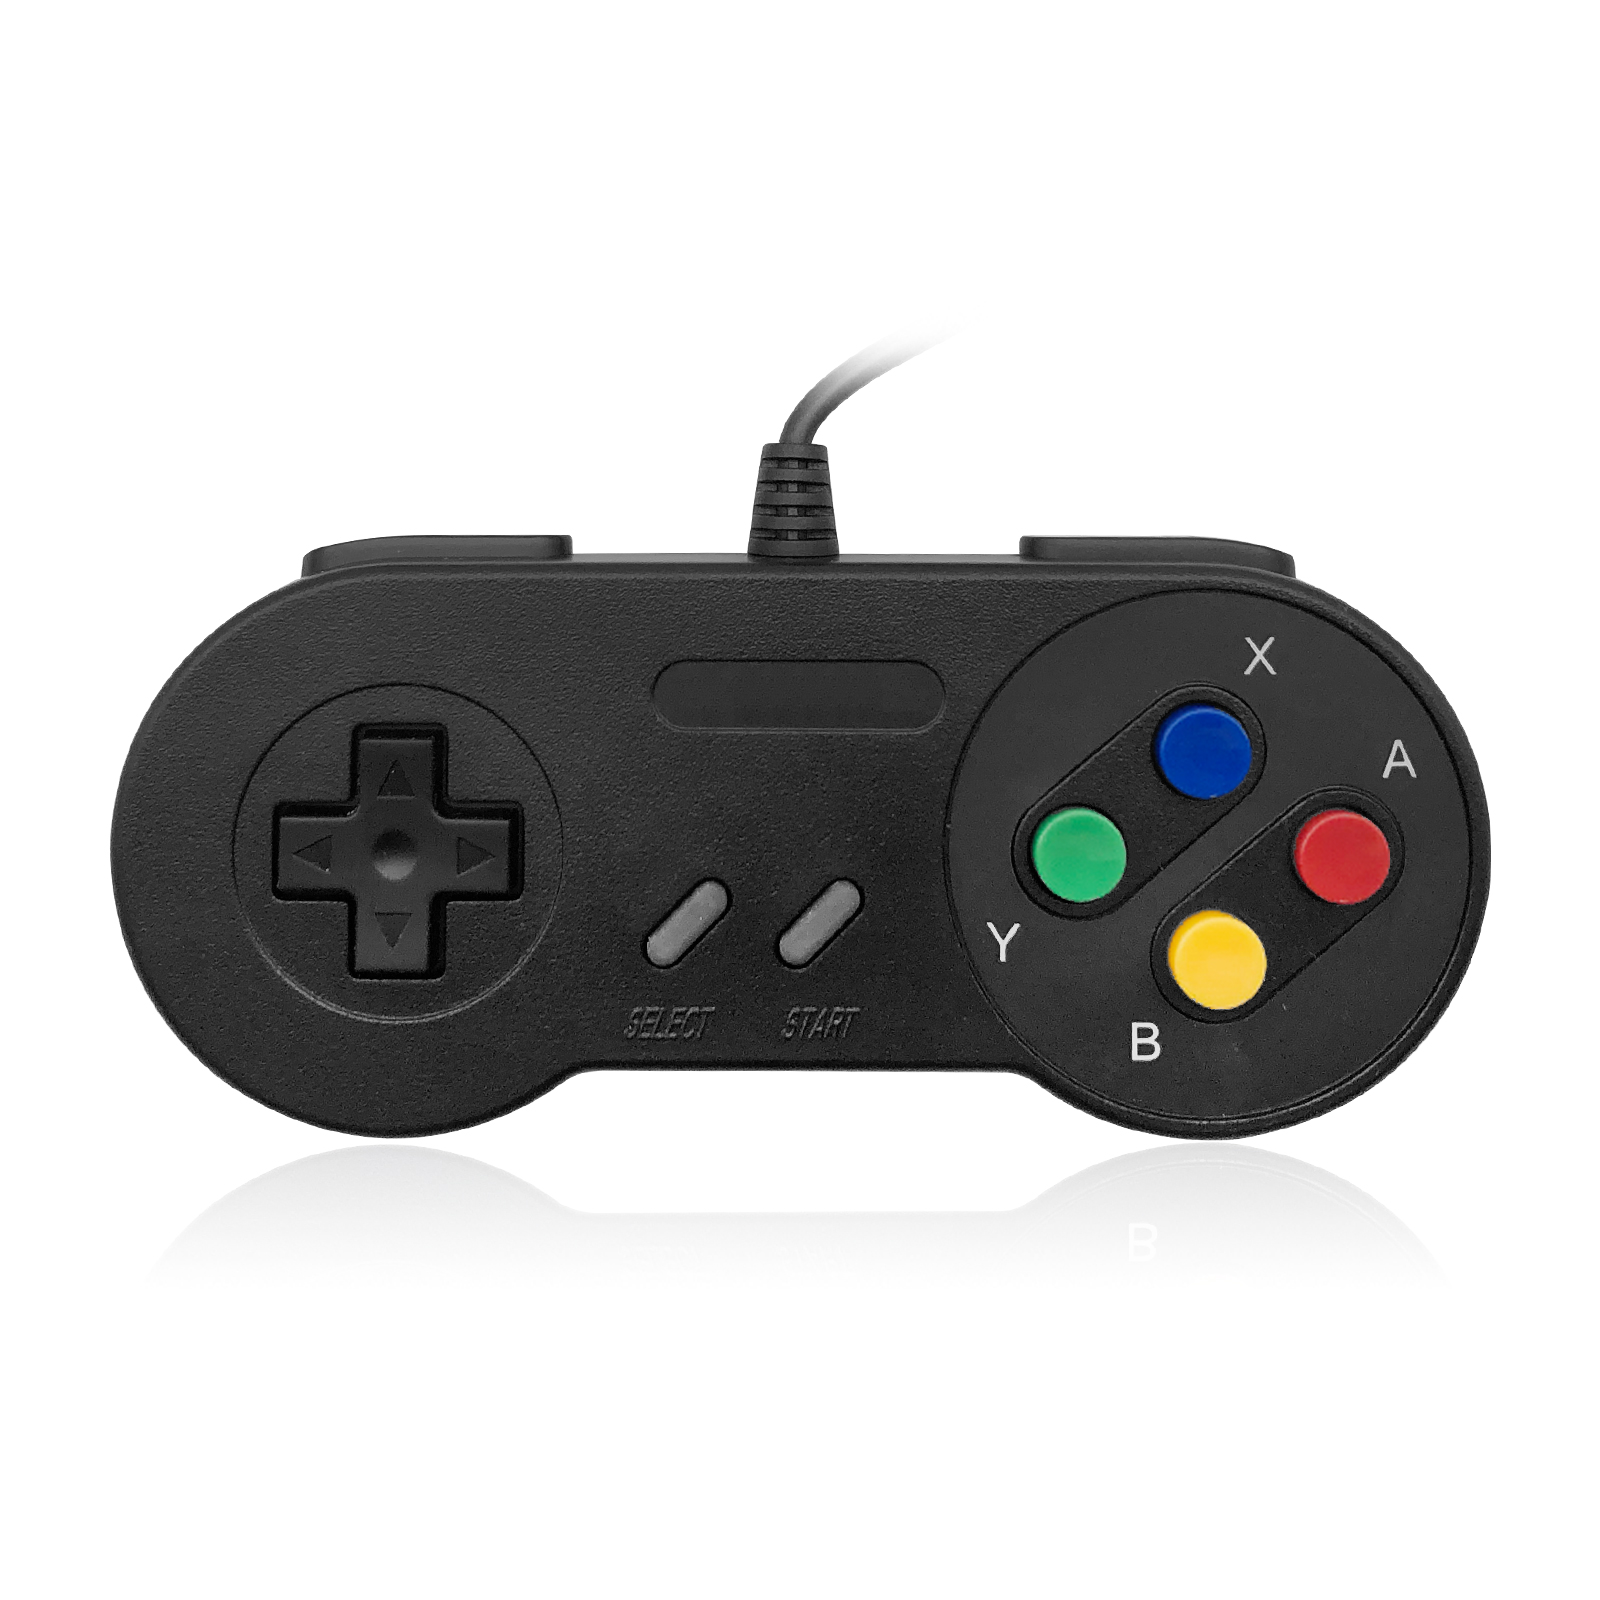 Usb Snes Controller Wired Controller for Switch, USB controller for PC Emulator Game, Mobile Controller for NES wired Joypad Game for Windows(Black)